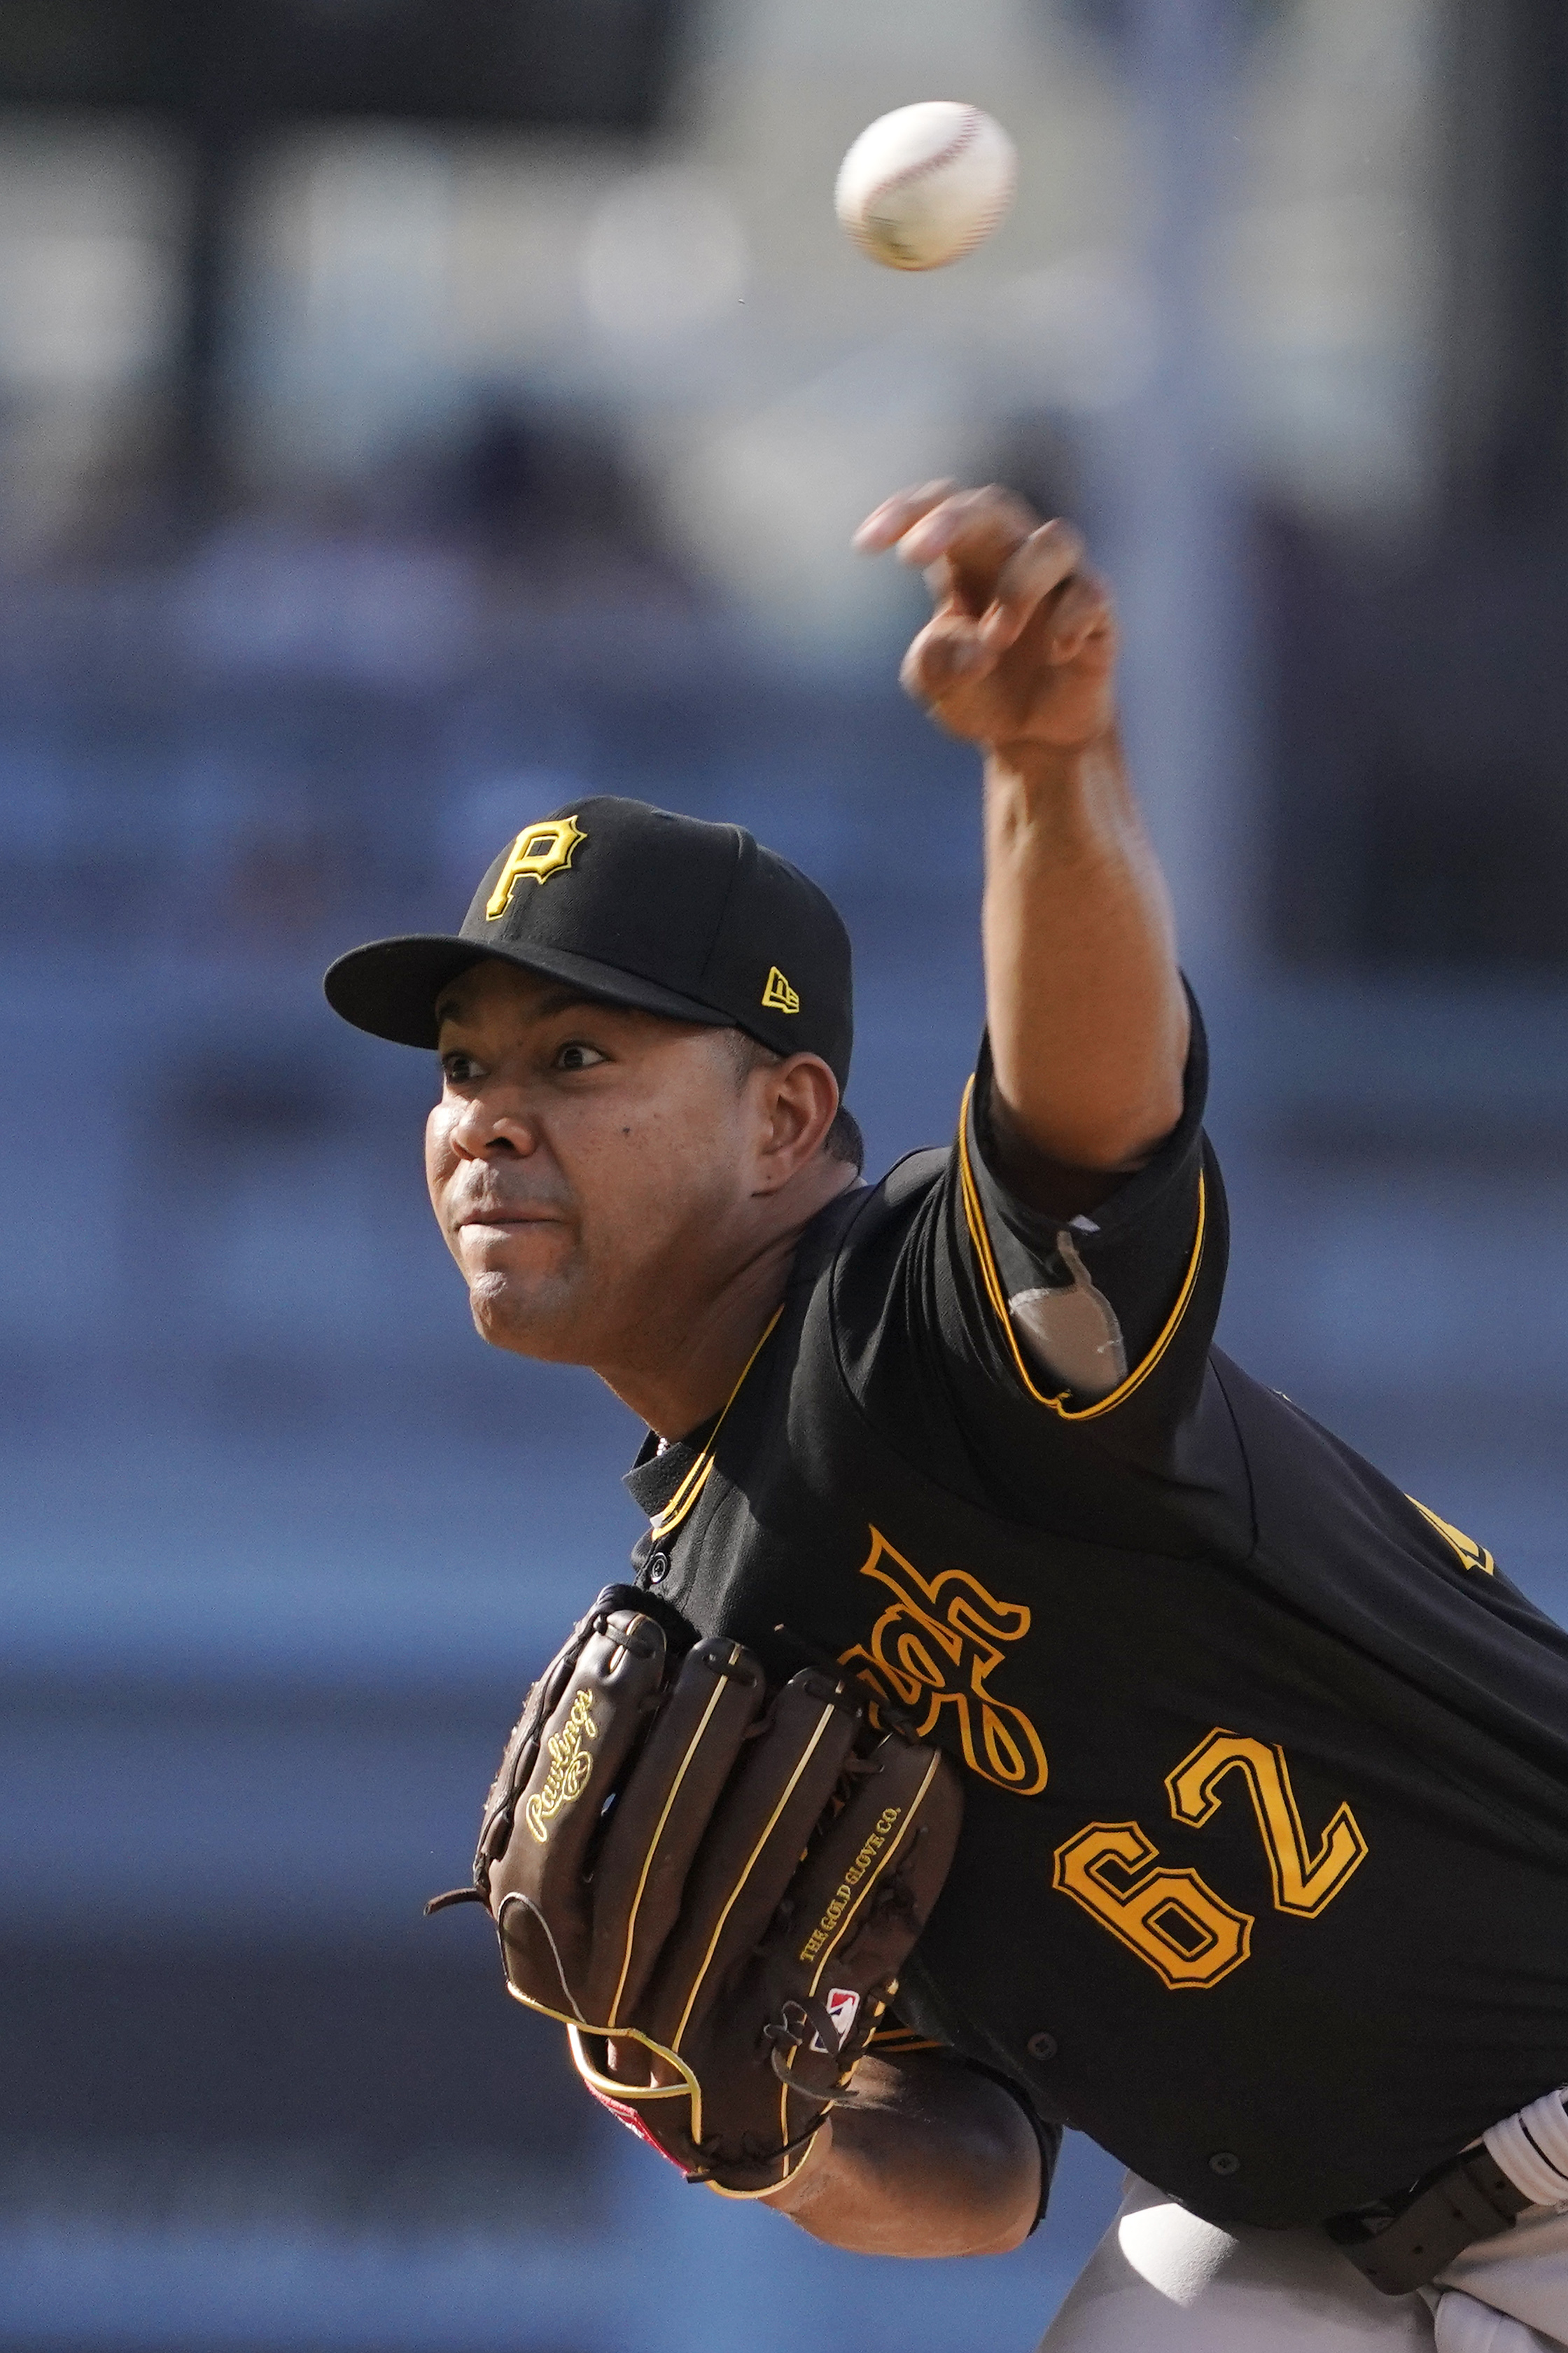 Cleaning up: Pirates beat Dodgers 8-4 for rare sweep in LA